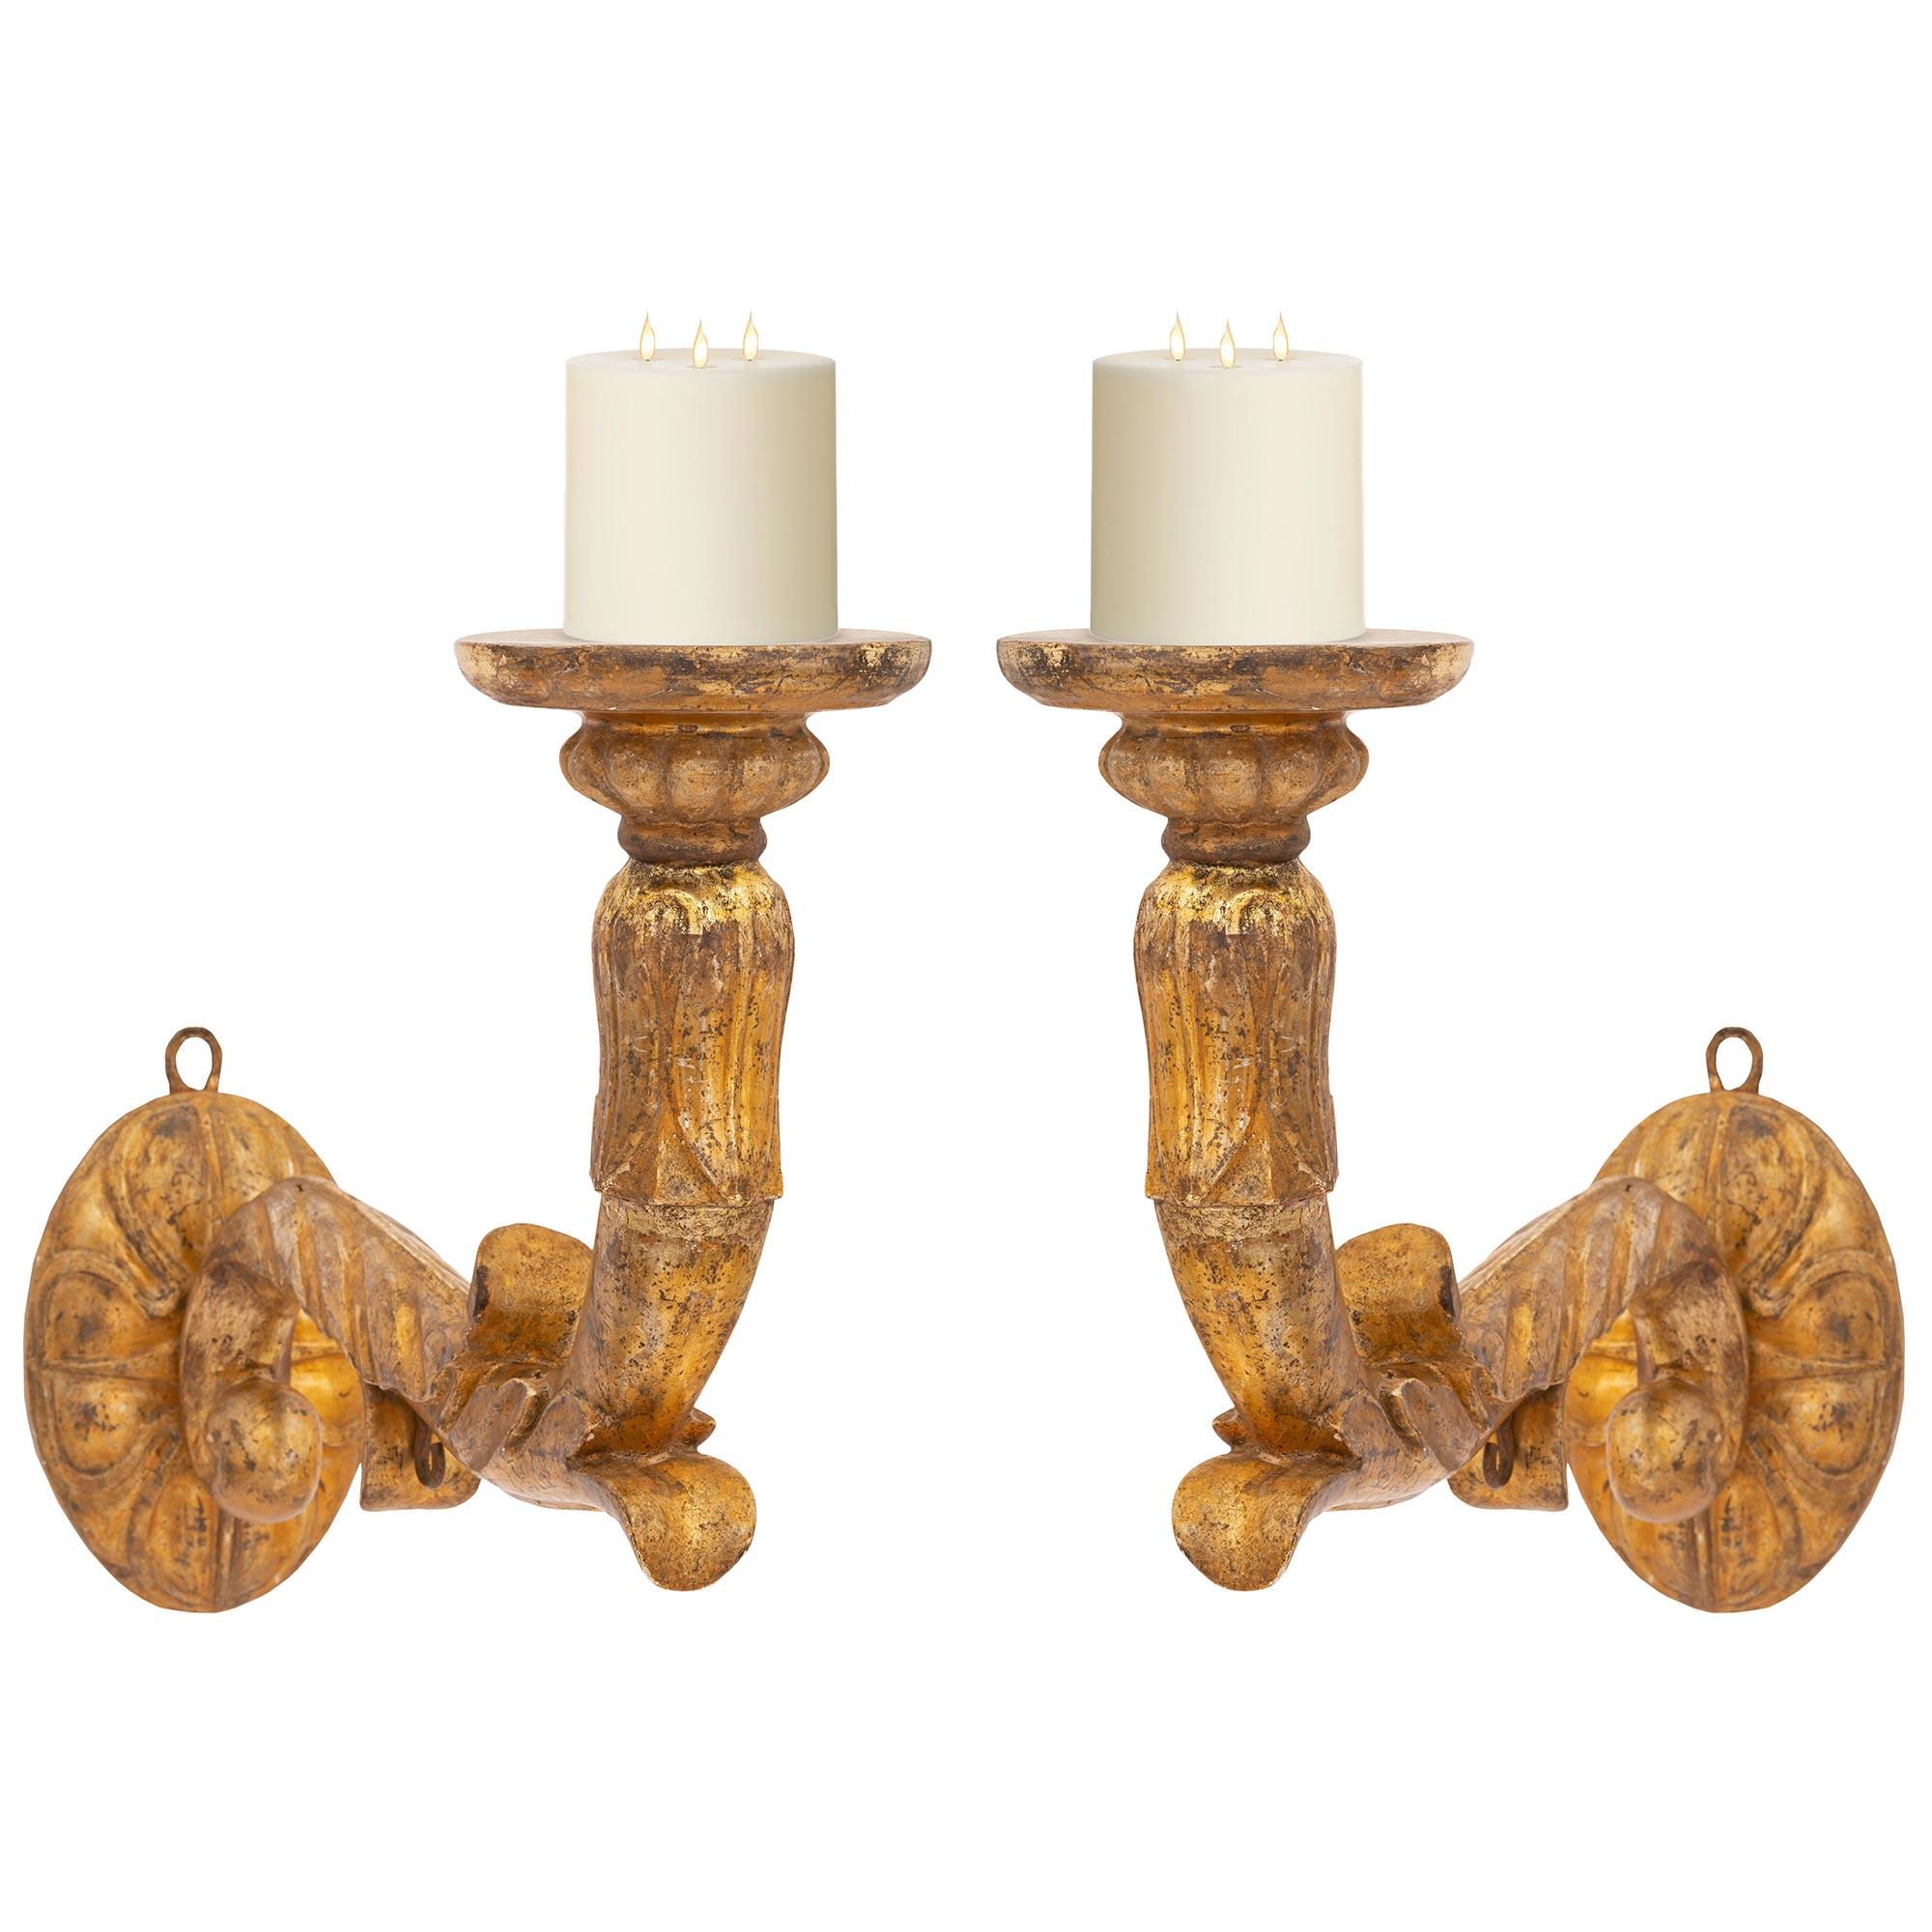 A handsome and most impressive pair of Italian 18th century Mecca Bras de Lumière sconces. Each one arm sconce is centered by an oval backplate with an elegant carved reeded floral design from where the arms branch out. Each scrolled arm is adorned